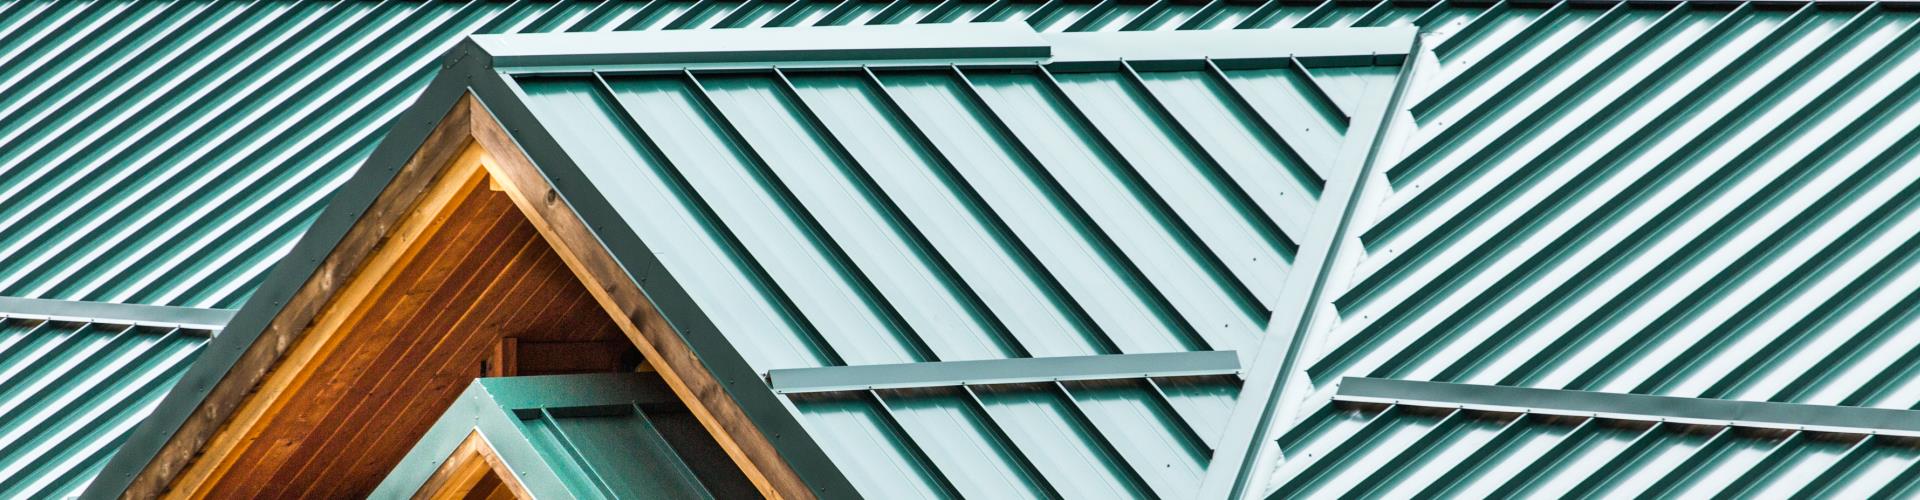 Kansas City Roofing Service - Sheet Metal Roof Repairs and Restoration